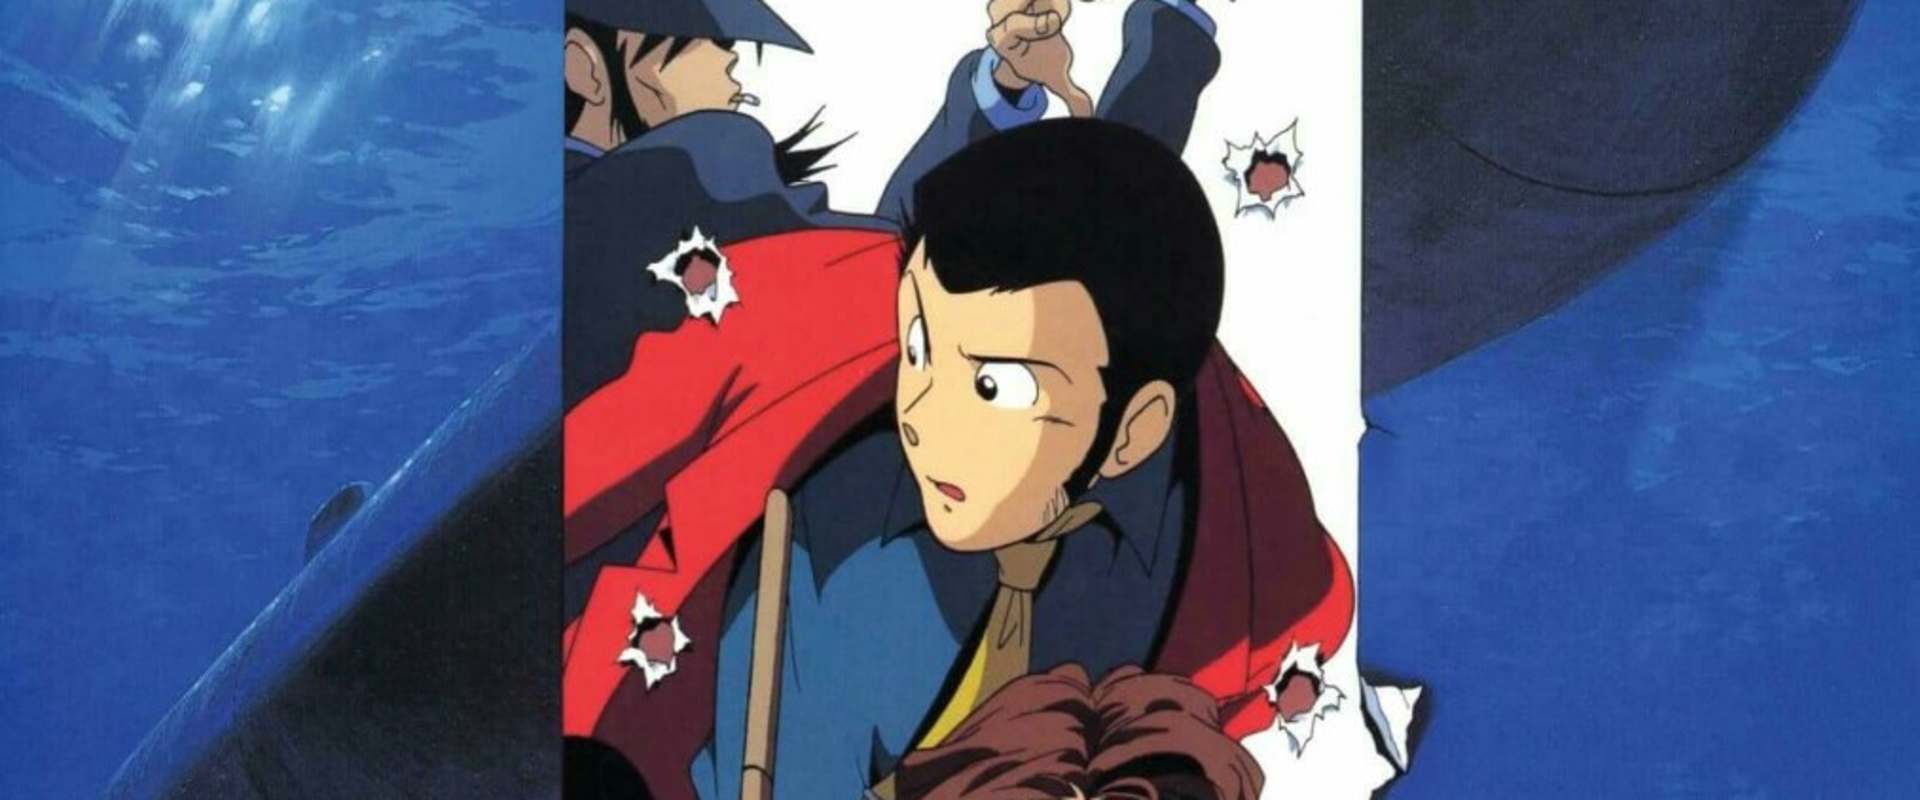 Lupin III: Voyage to Danger background 2